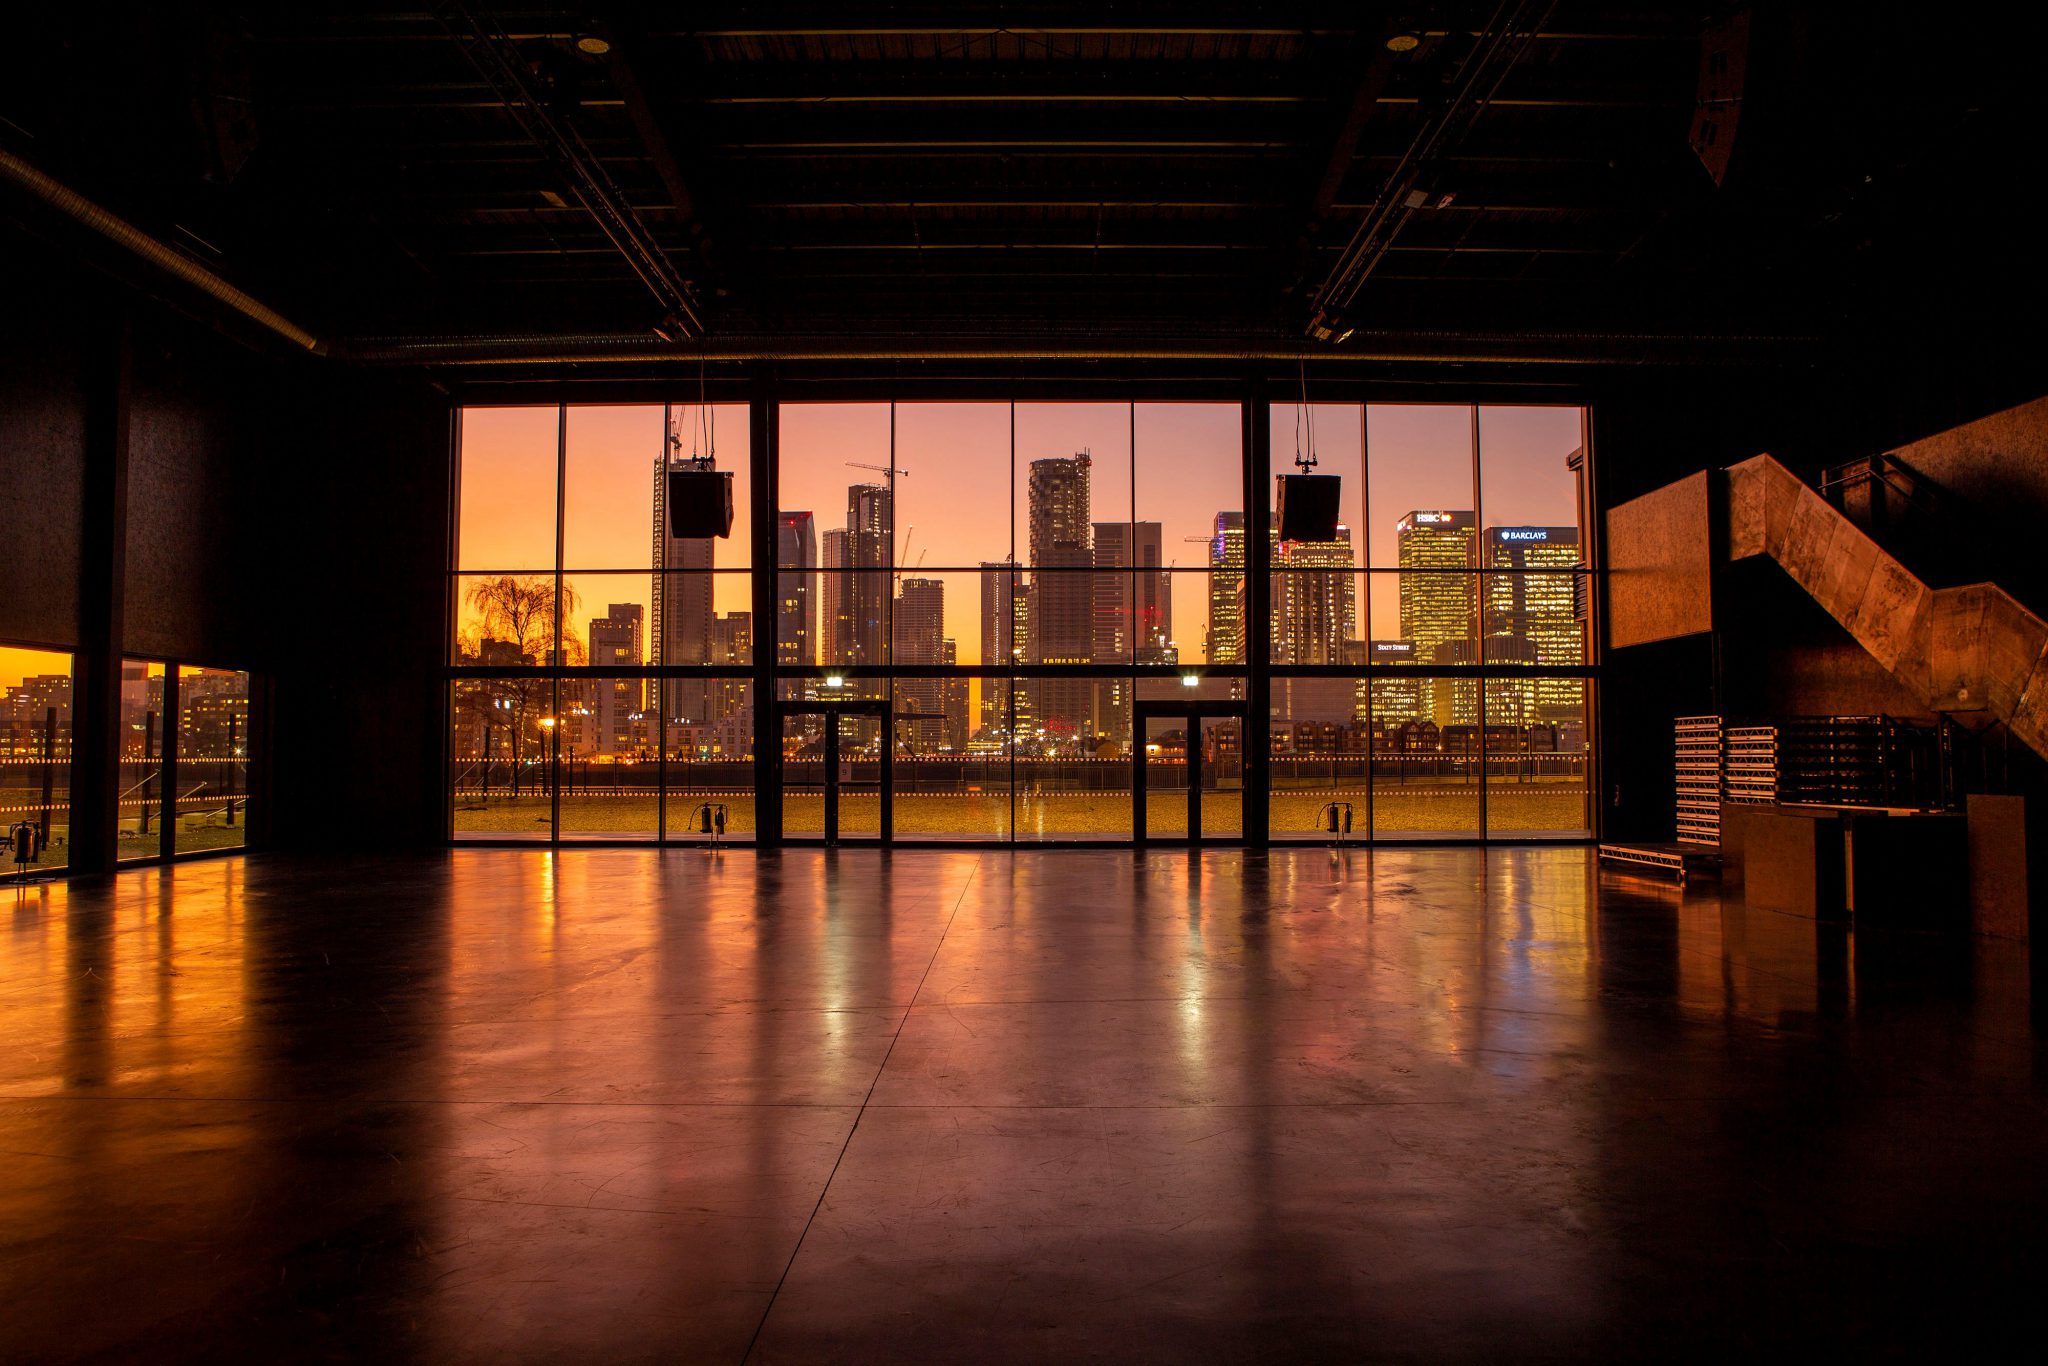 View over a city with skyscrapes in the evening from inside a building